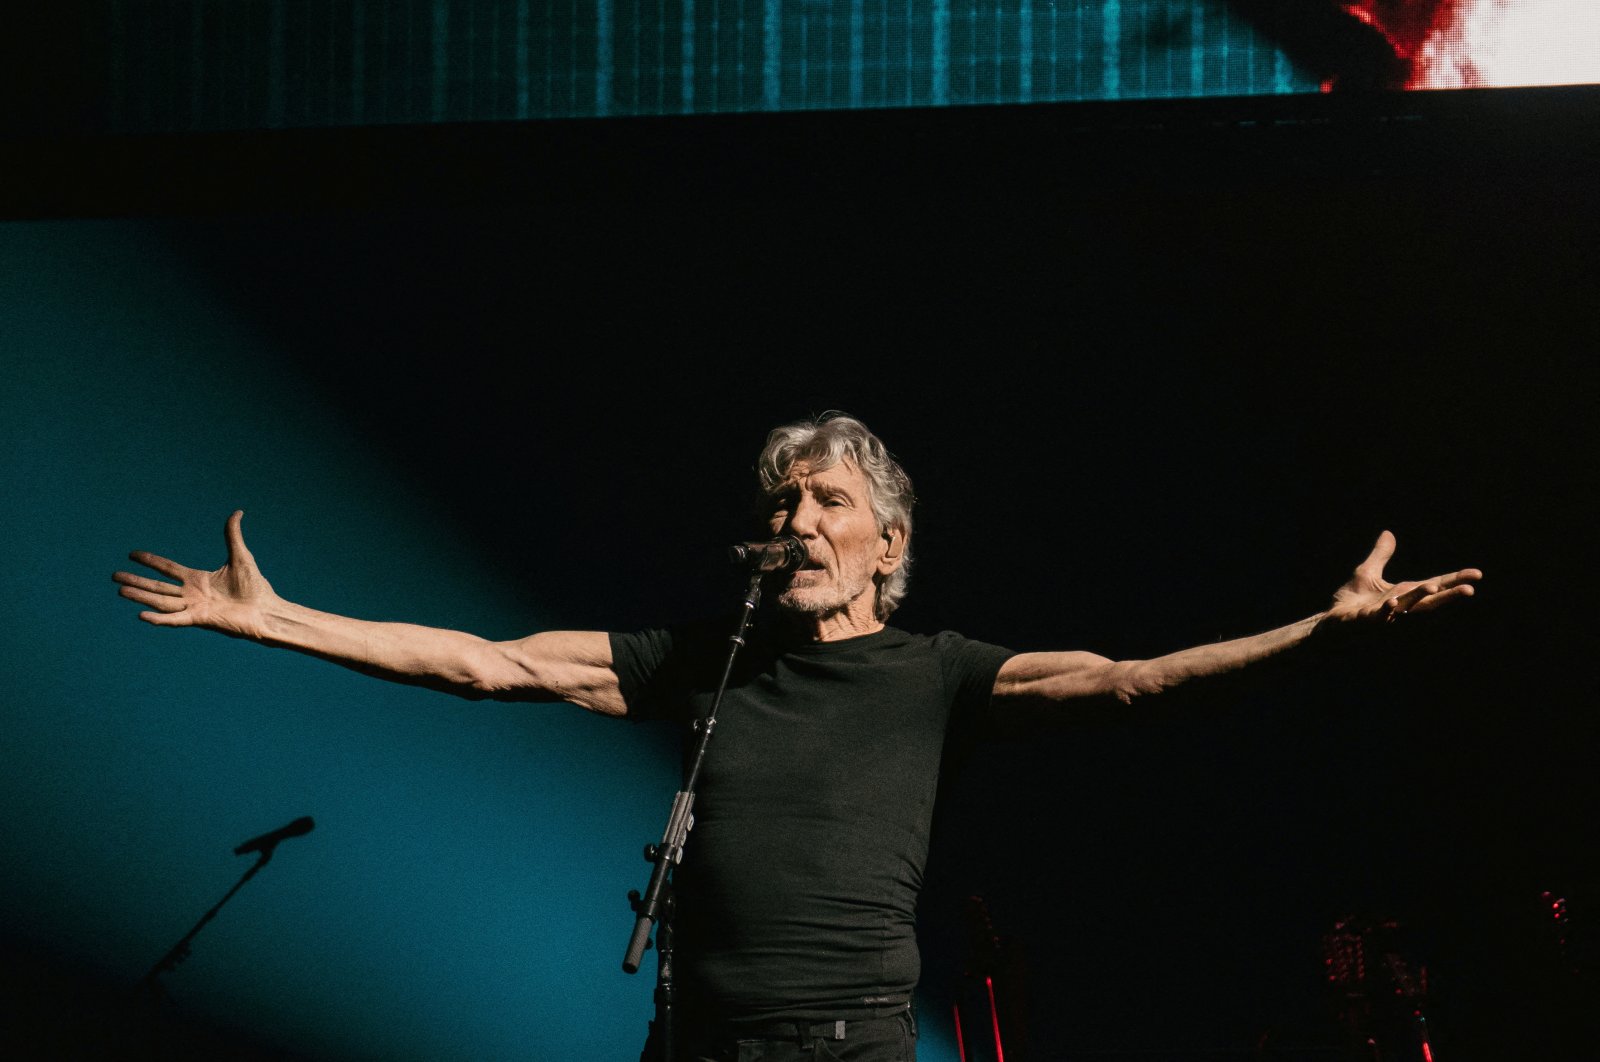 Former rock band &quot;Pink Floyd&quot; musician Roger Waters performs on stage during his tour at Tacoma Dome in Tacoma, Washington, U.S., Sept. 18, 2022. (Reuters Photo)